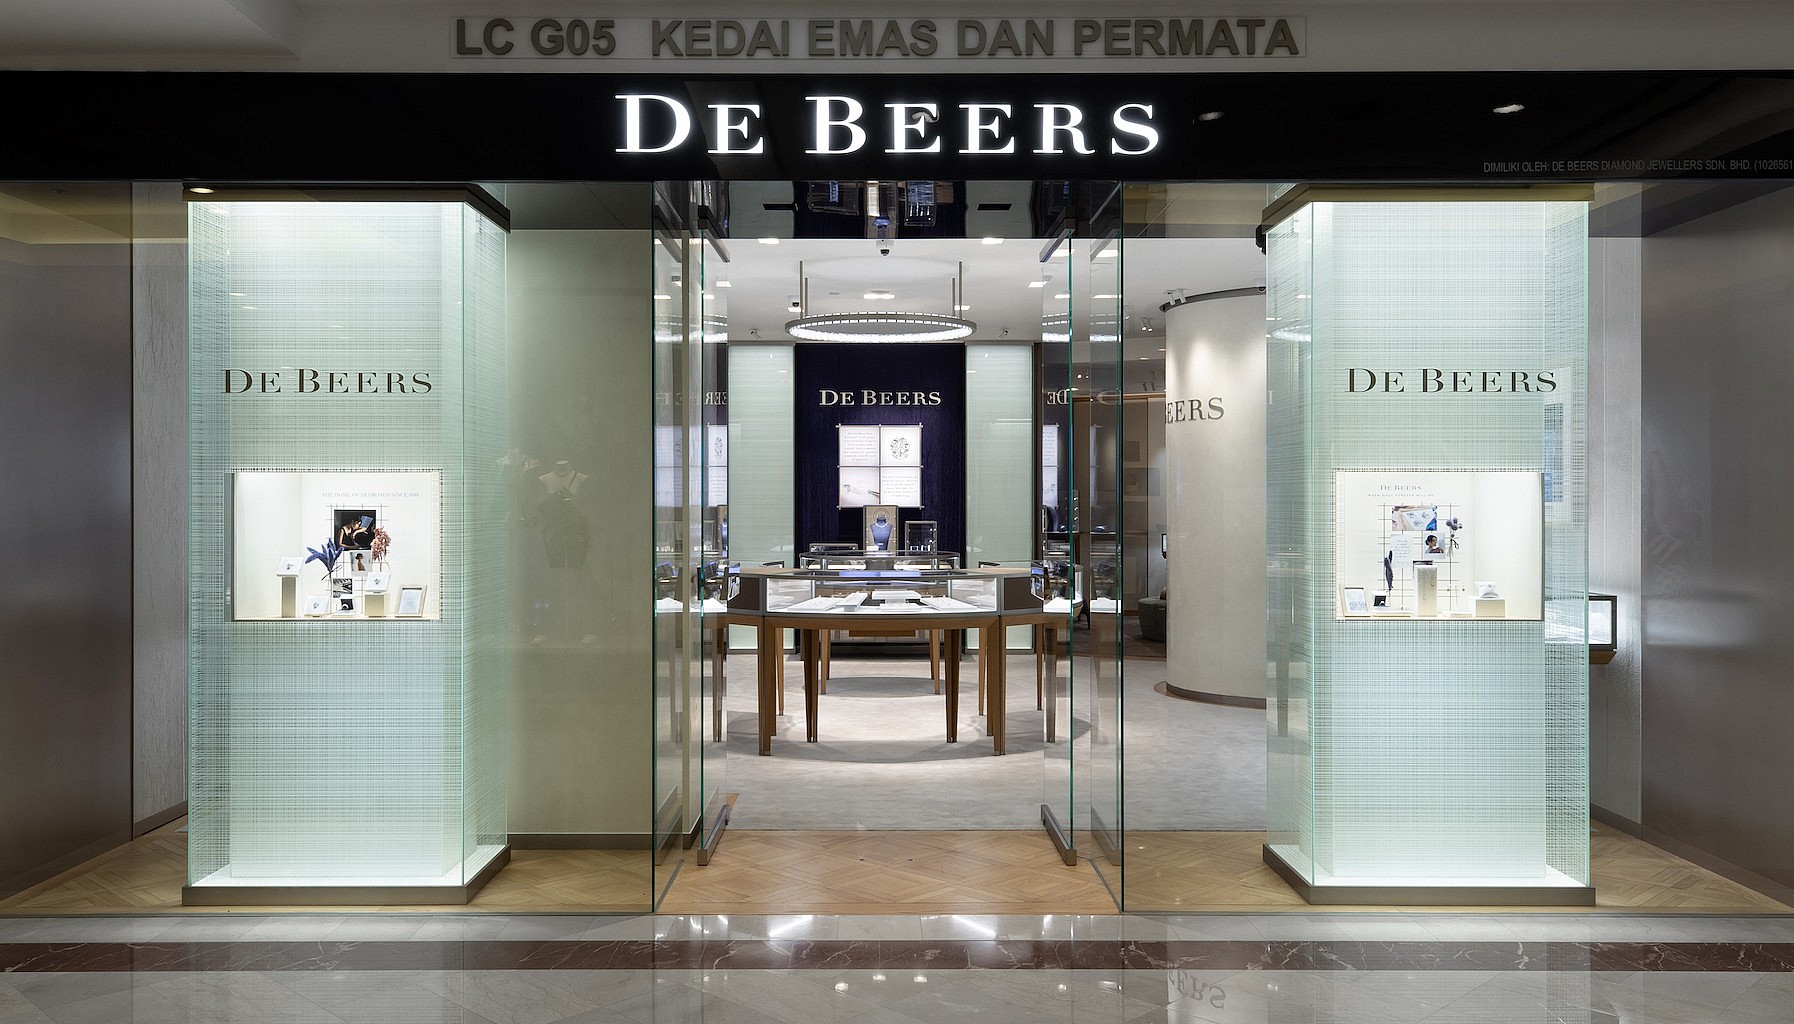 De Beers' 130-year Mastery of Diamonds is Showcased in its New KL